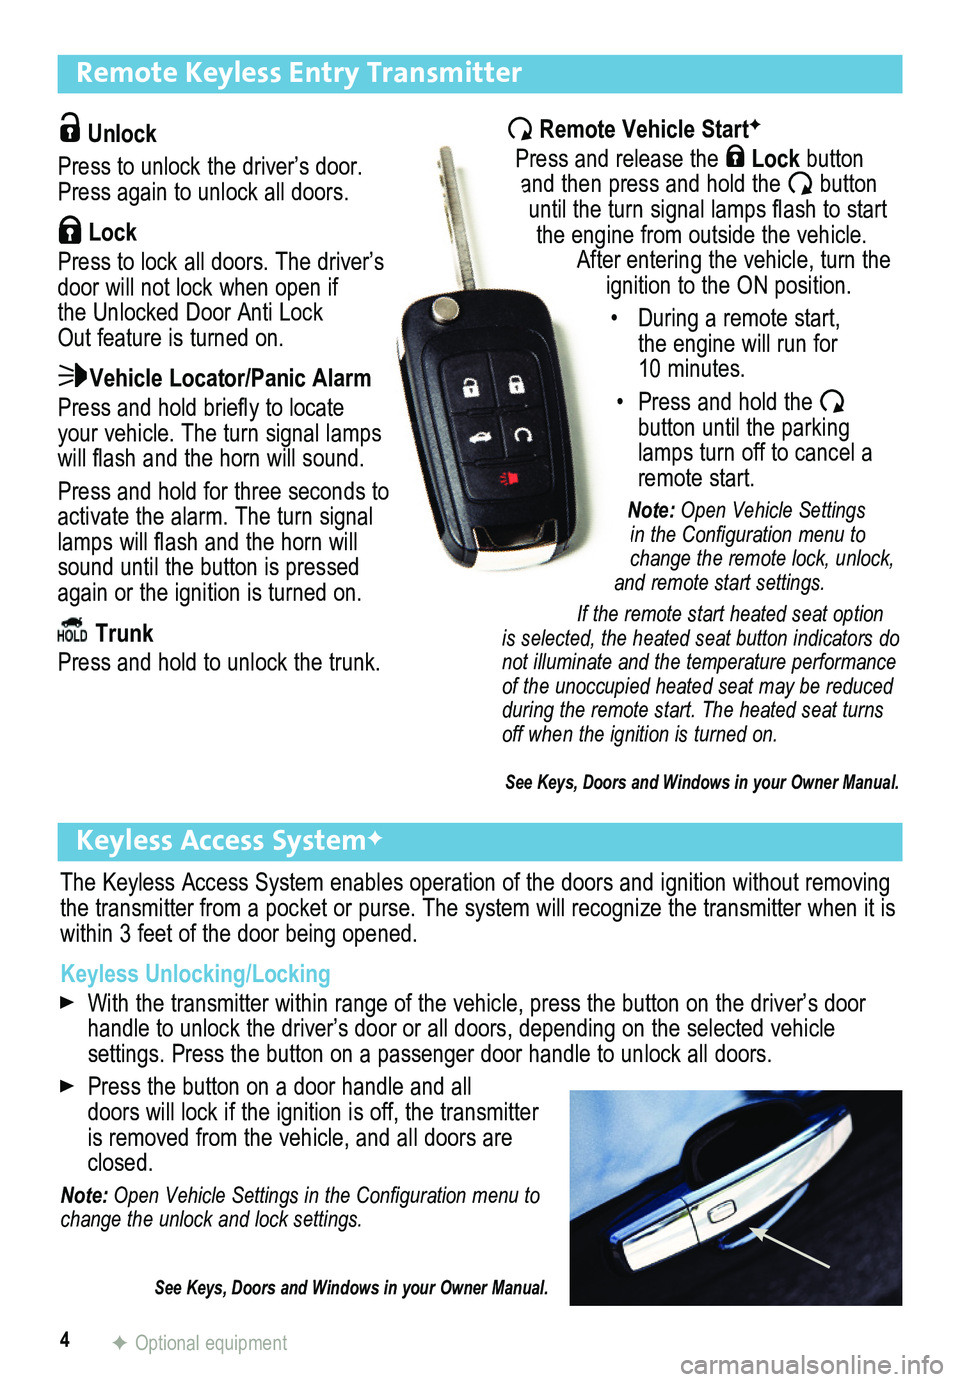 BUICK VERANO 2015  Get To Know Guide 4
Remote Keyless Entry Transmitter
Keyless Access SystemF
The Keyless Access System enables operation of the doors and ignition wi\
thout removing the transmitter from a pocket or purse. The system wi